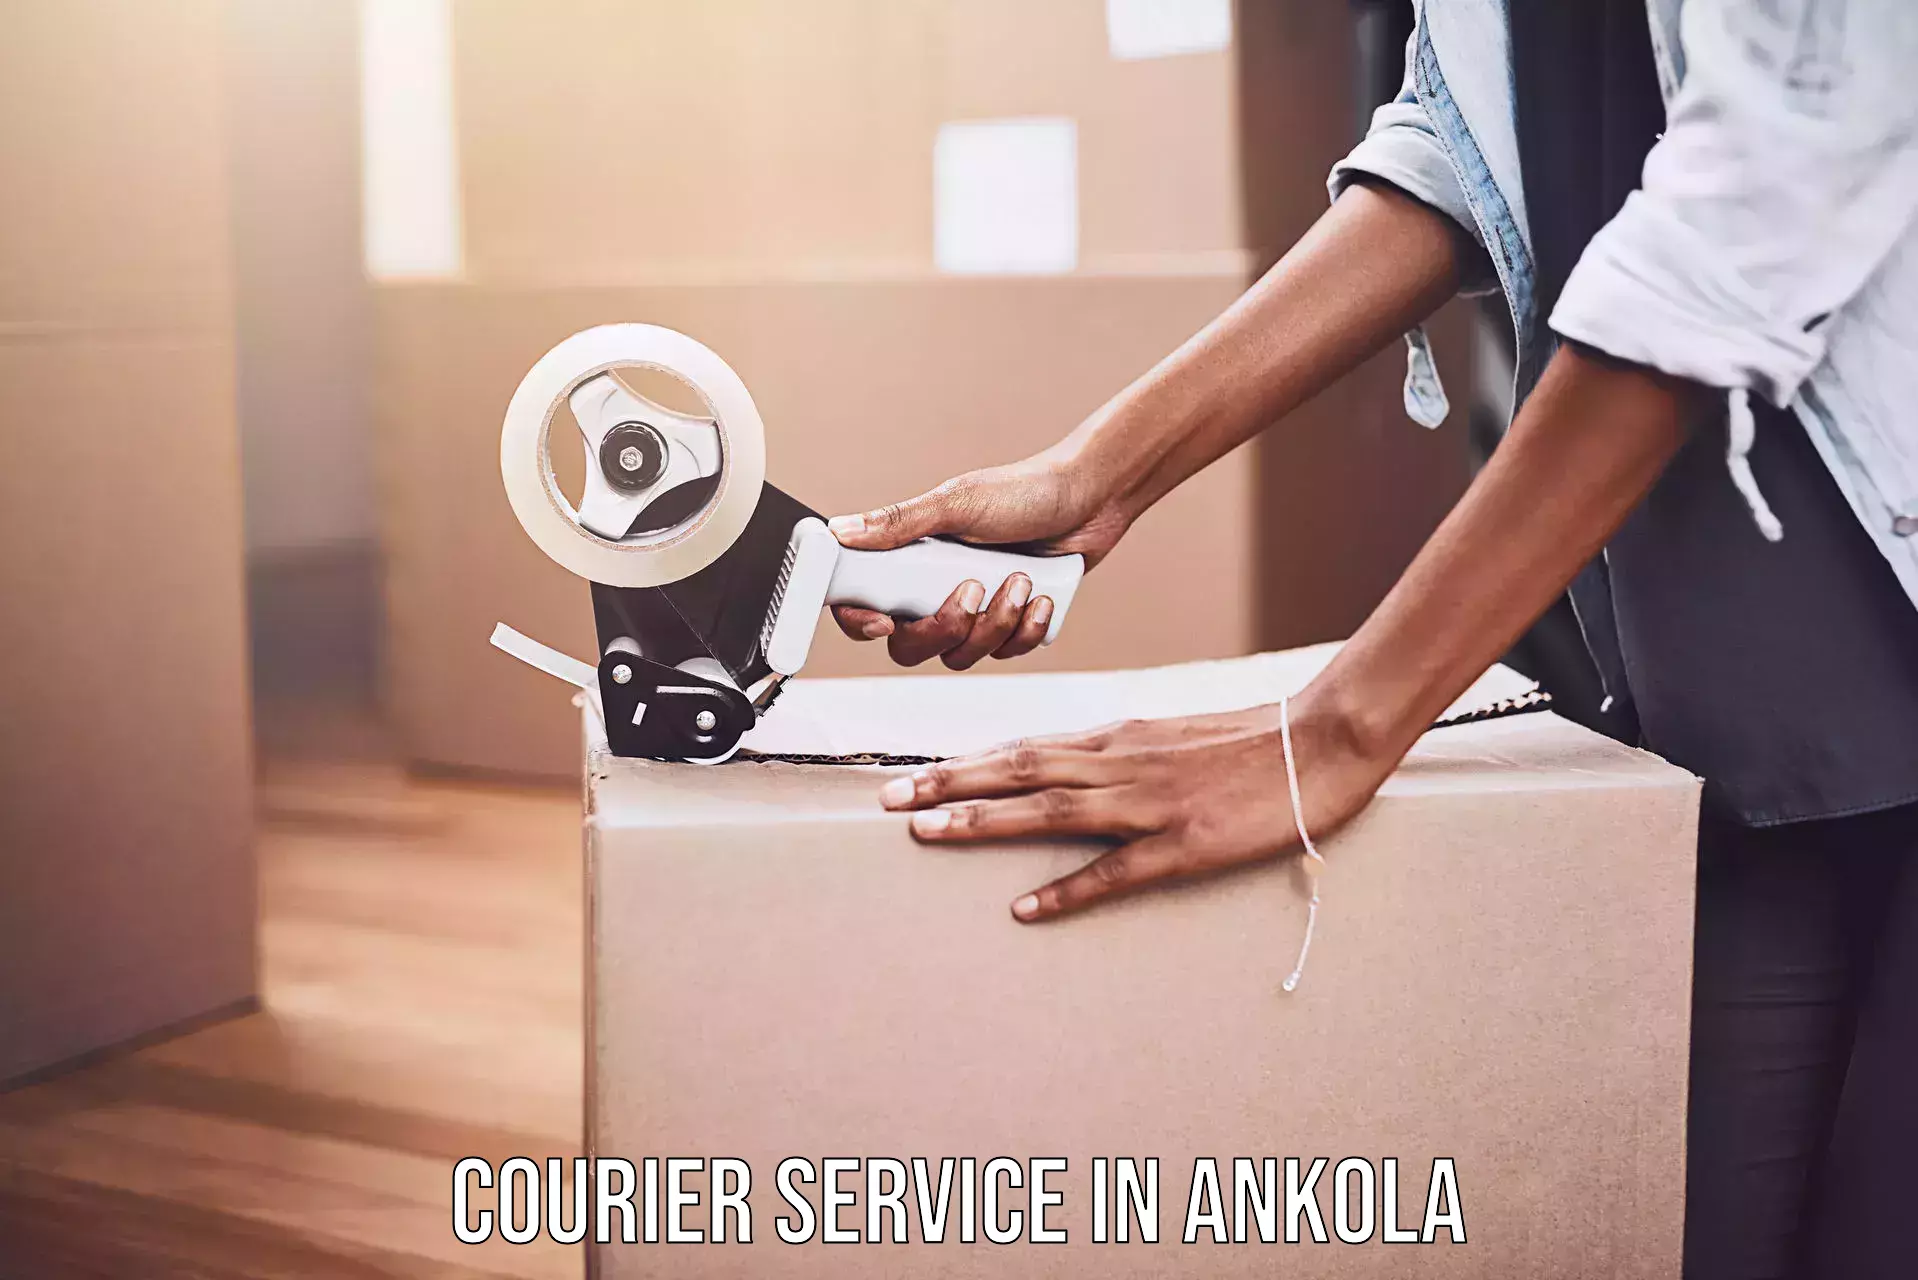 Express package delivery in Ankola